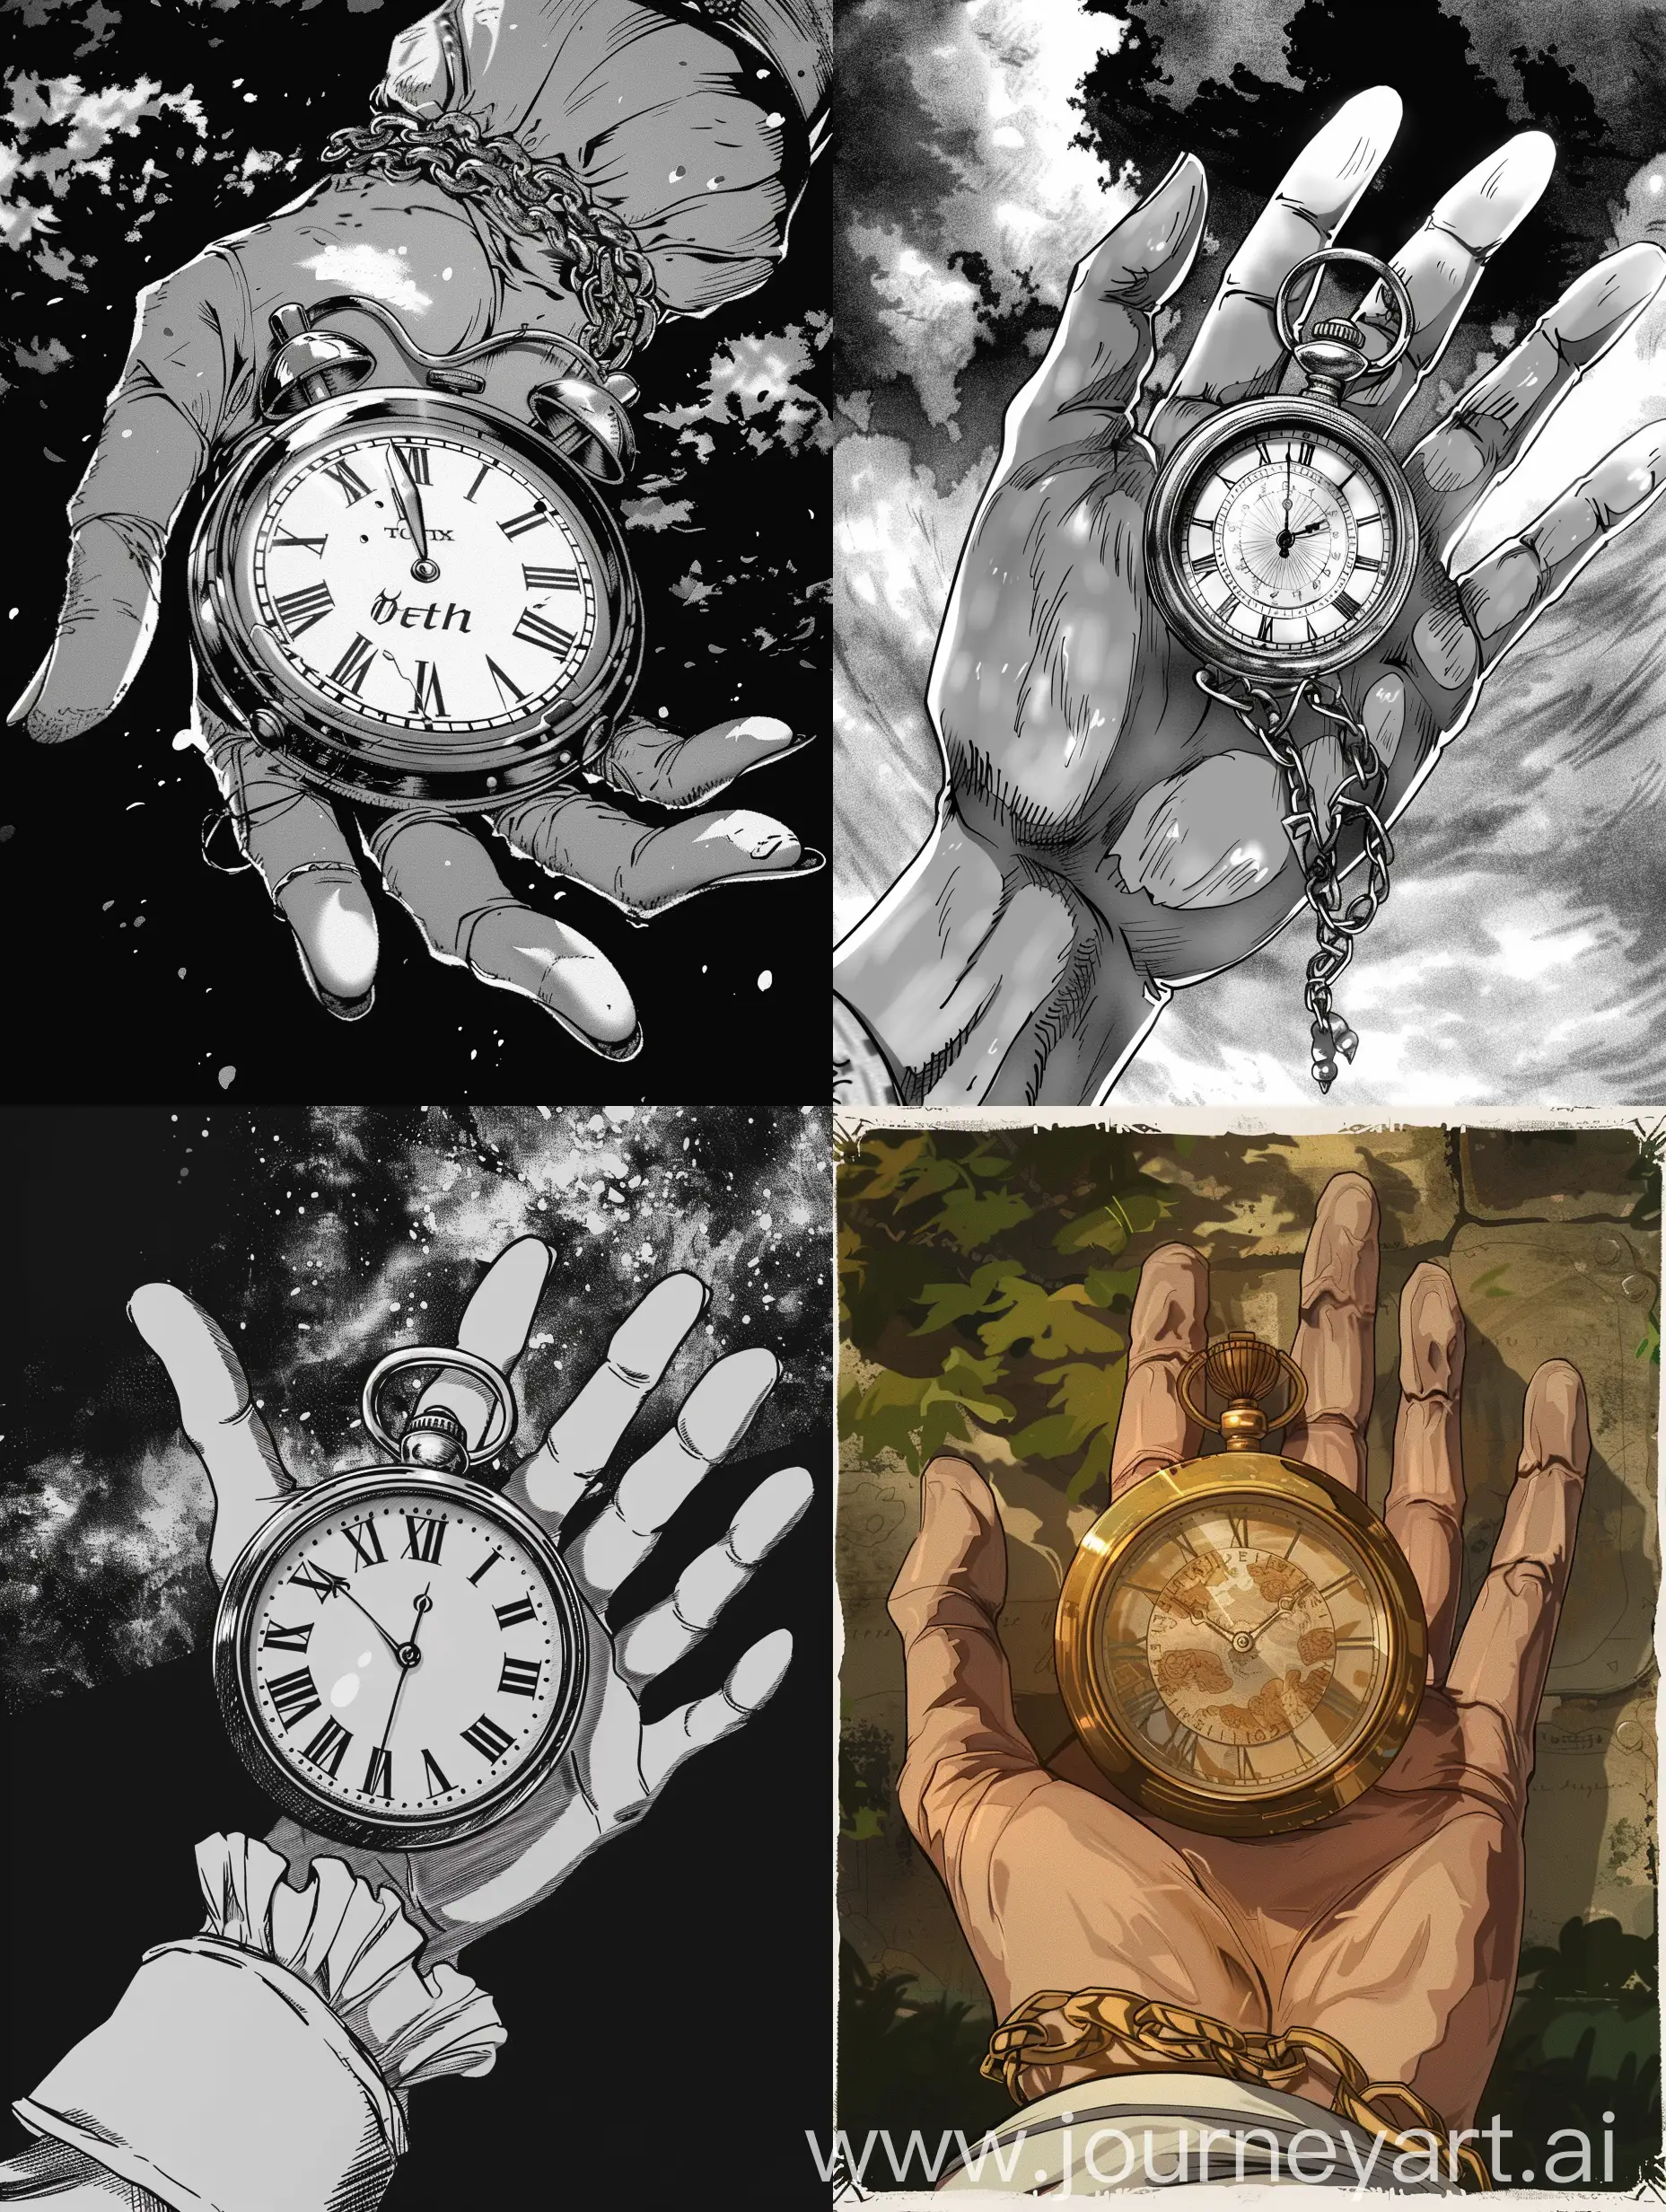 the time amulet in the hand, manga style.